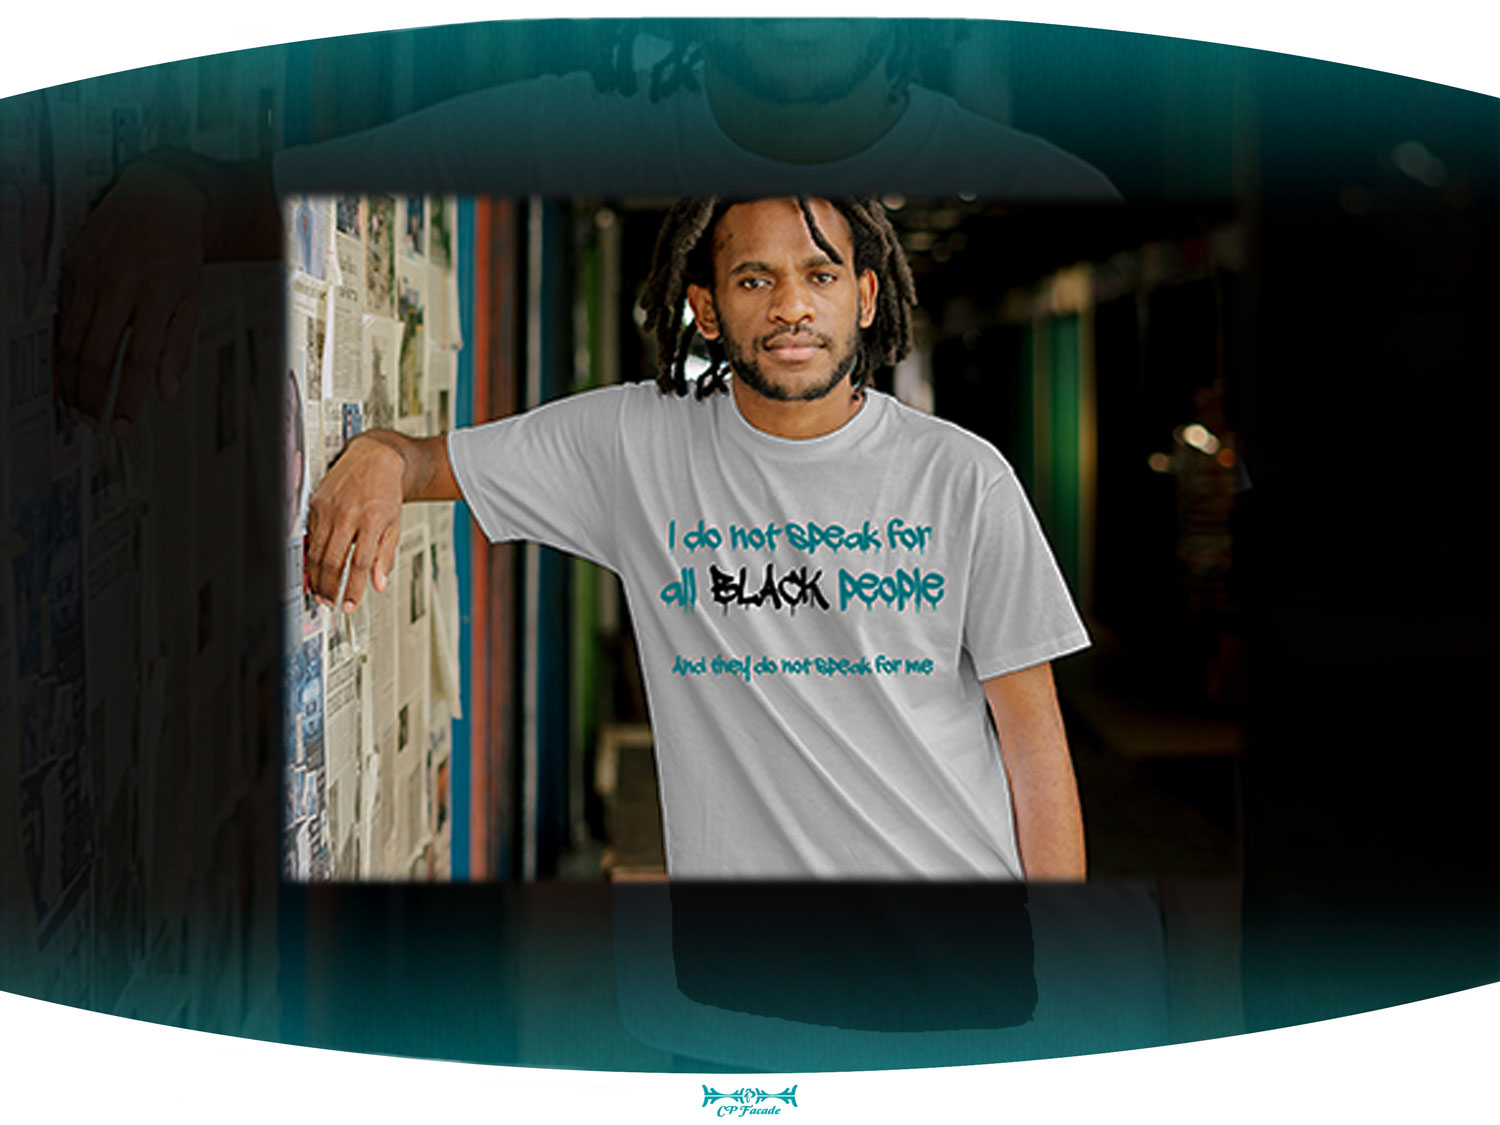 Black man leaning on wall wearing light grey t-shirt with the phrase I do not speak for all black people on the front of it